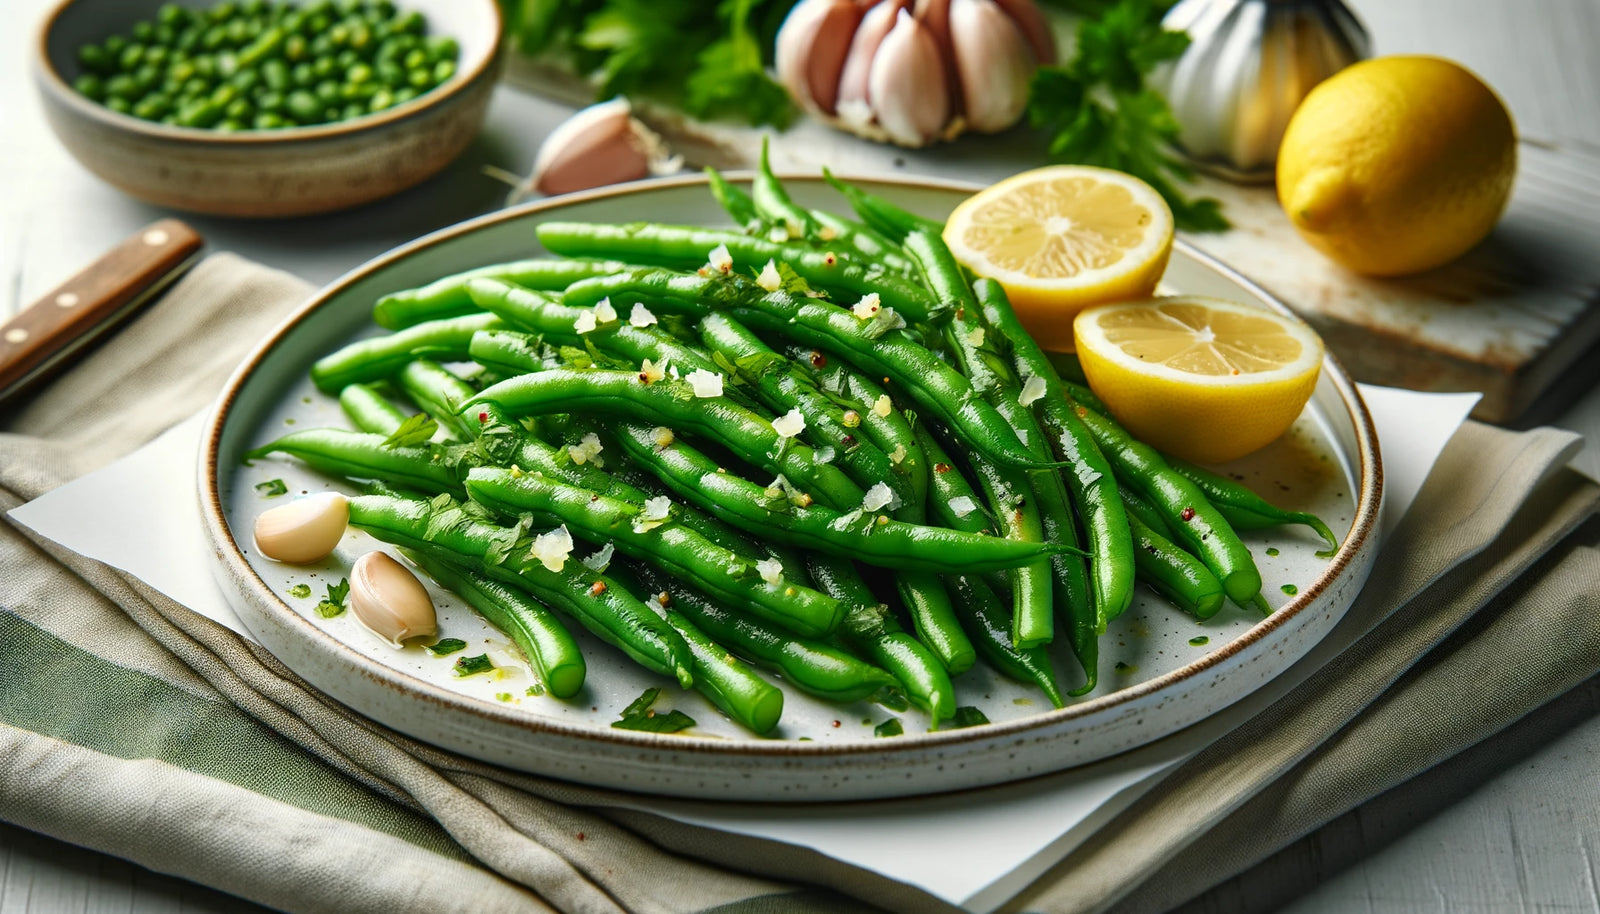 Grilled Haricot Verts with Garlic and Lemon - Perfectly Seared